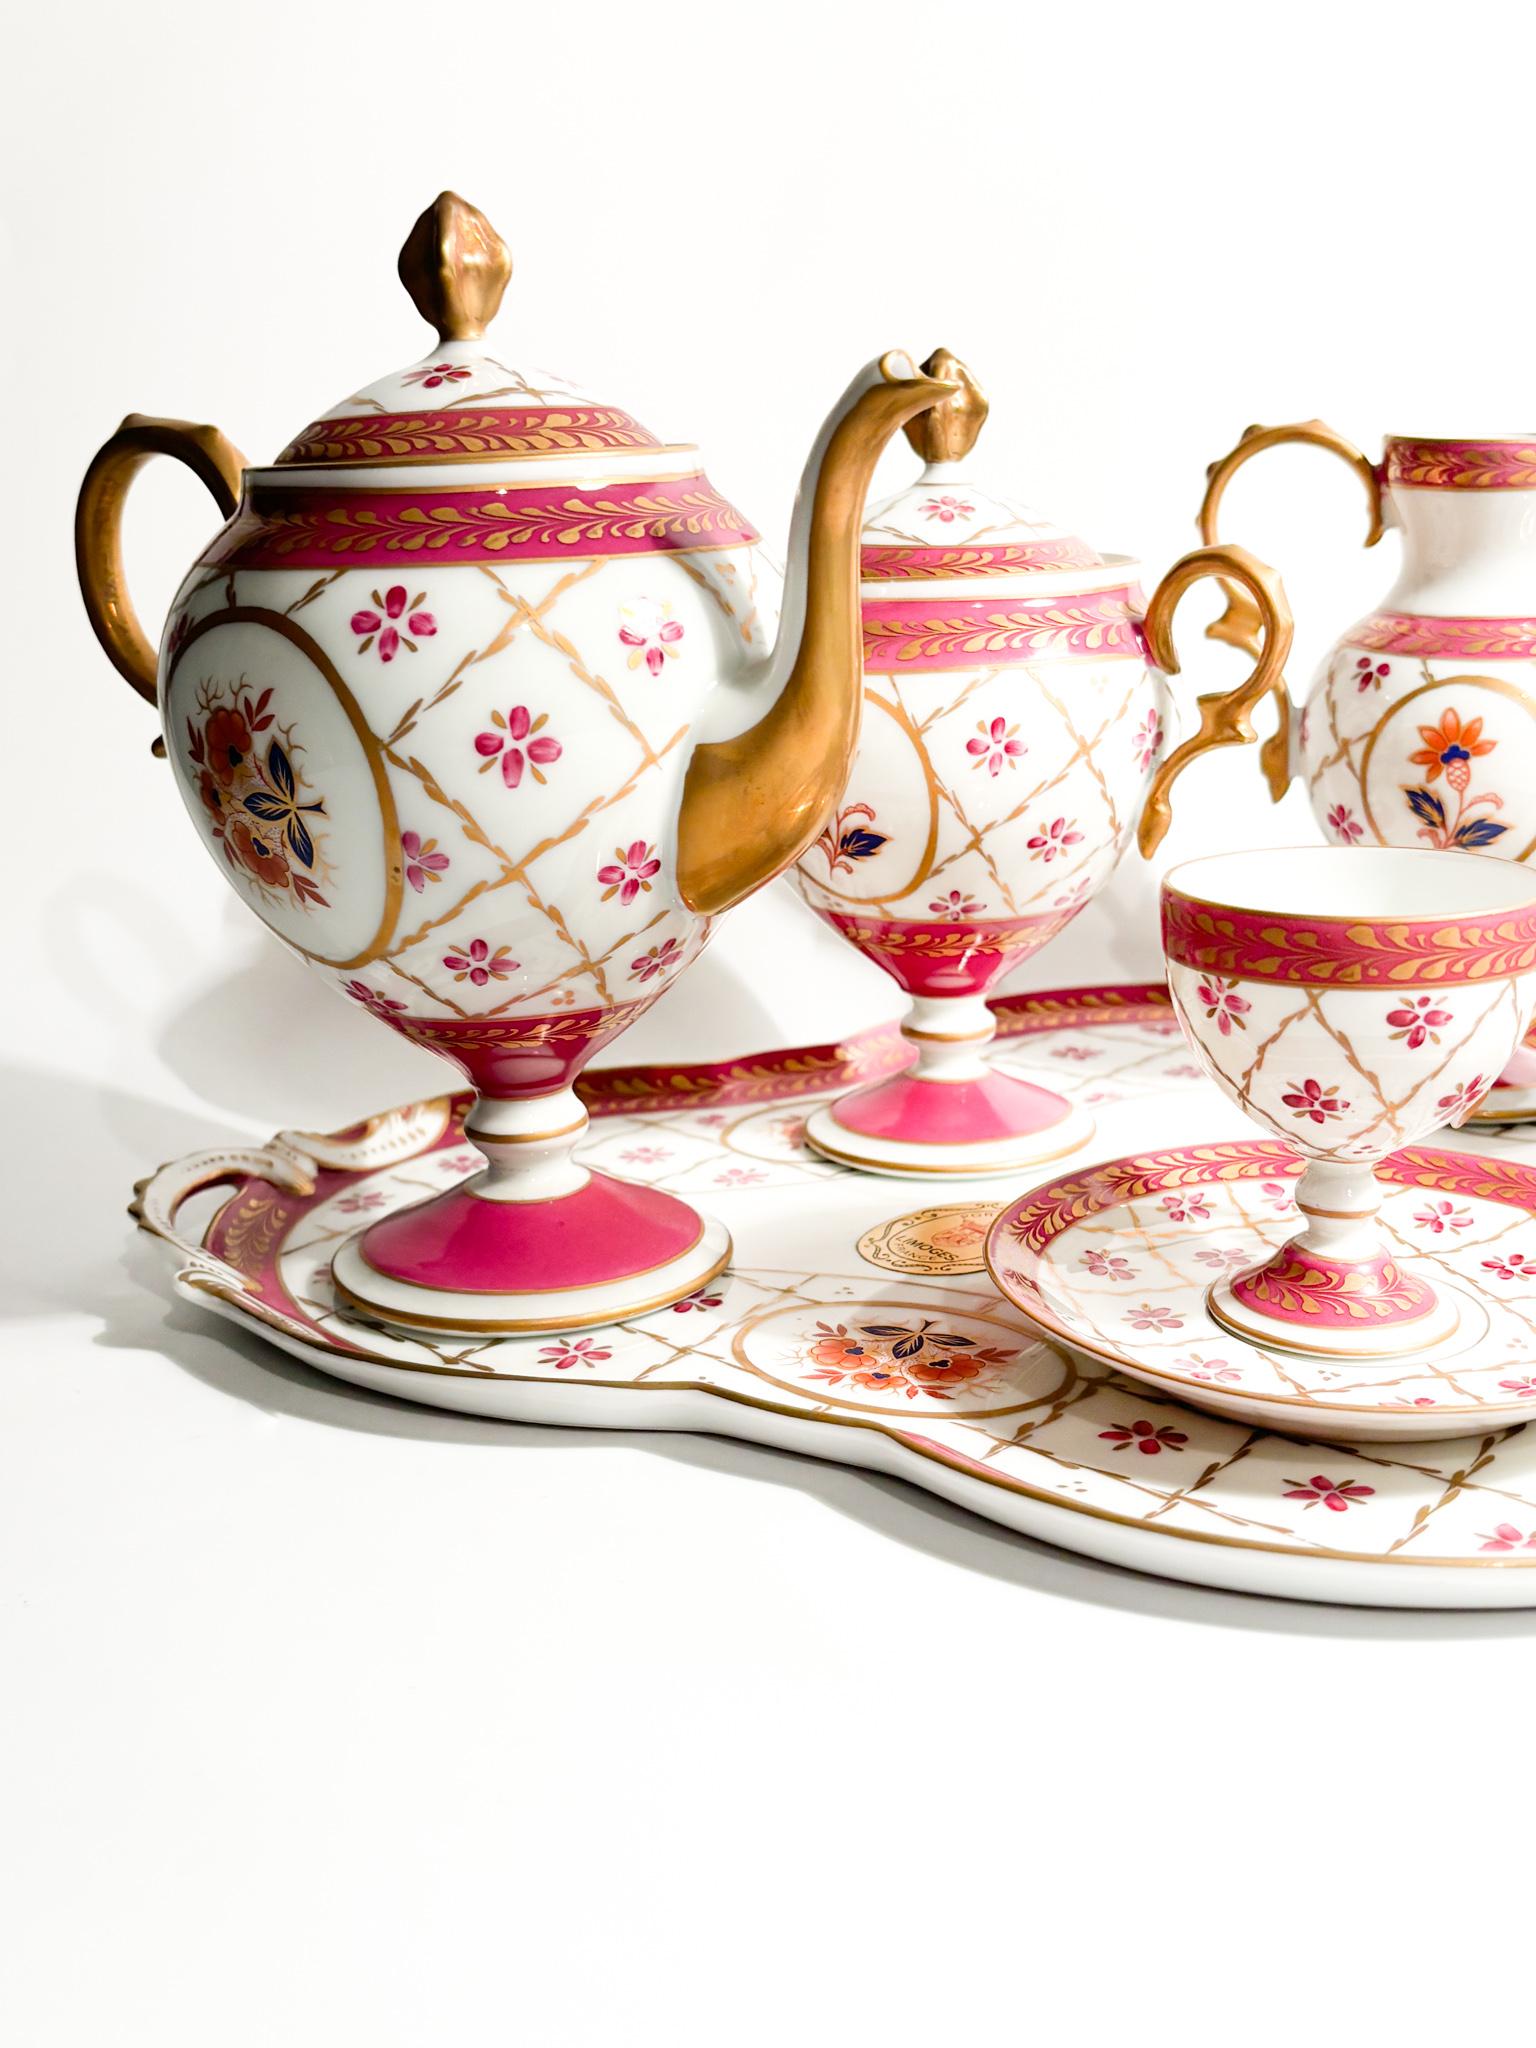 Coffee set for two in Limoges porcelain made in the 1950s

Tray - Ø 40 cm Ø 27.5 cm

The Limoges porcelain dates back to the 1660s-70s, when in a French town near Limoges a kaolin deposit, material necessary for the production of hard-paste